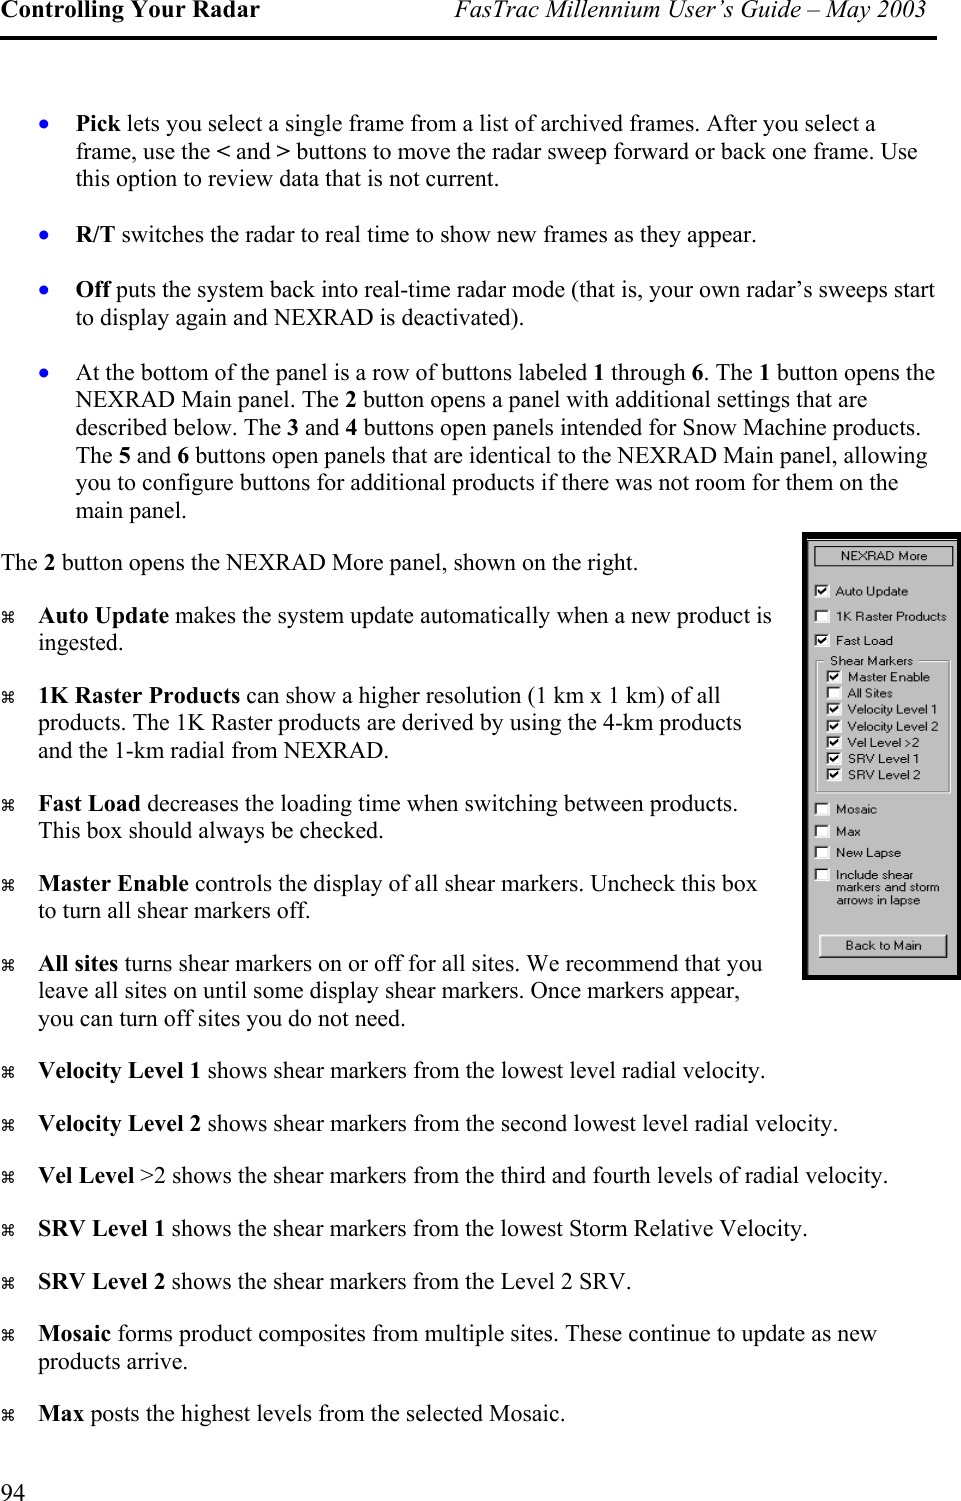 Controlling Your Radar  FasTrac Millennium User’s Guide – May 2003 •  Pick lets you select a single frame from a list of archived frames. After you select a frame, use the &lt; and &gt; buttons to move the radar sweep forward or back one frame. Use this option to review data that is not current. • • • D. f. ed. R/T switches the radar to real time to show new frames as they appear. Off puts the system back into real-time radar mode (that is, your own radar’s sweeps start to display again and NEXRAD is deactivated). At the bottom of the panel is a row of buttons labeled 1 through 6. The 1 button opens the NEXRAD Main panel. The 2 button opens a panel with additional settings that are described below. The 3 and 4 buttons open panels intended for Snow Machine products. The 5 and 6 buttons open panels that are identical to the NEXRAD Main panel, allowing you to configure buttons for additional products if there was not room for them on the main panel. The 2 button opens the NEXRAD More panel, shown on the right.   Auto Update makes the system update automatically when a new product is ingested.   1K Raster Products can show a higher resolution (1 km x 1 km) of all products. The 1K Raster products are derived by using the 4-km products and the 1-km radial from NEXRA  Fast Load decreases the loading time when switching between products. This box should always be checked.   Master Enable controls the display of all shear markers. Uncheck this box to turn all shear markers of  All sites turns shear markers on or off for all sites. We recommend that you leave all sites on until some display shear markers. Once markers appear, you can turn off sites you do not ne  Velocity Level 1 shows shear markers from the lowest level radial velocity.   Velocity Level 2 shows shear markers from the second lowest level radial velocity.   Vel Level &gt;2 shows the shear markers from the third and fourth levels of radial velocity.   SRV Level 1 shows the shear markers from the lowest Storm Relative Velocity.   SRV Level 2 shows the shear markers from the Level 2 SRV.   Mosaic forms product composites from multiple sites. These continue to update as new products arrive.   Max posts the highest levels from the selected Mosaic. 94 